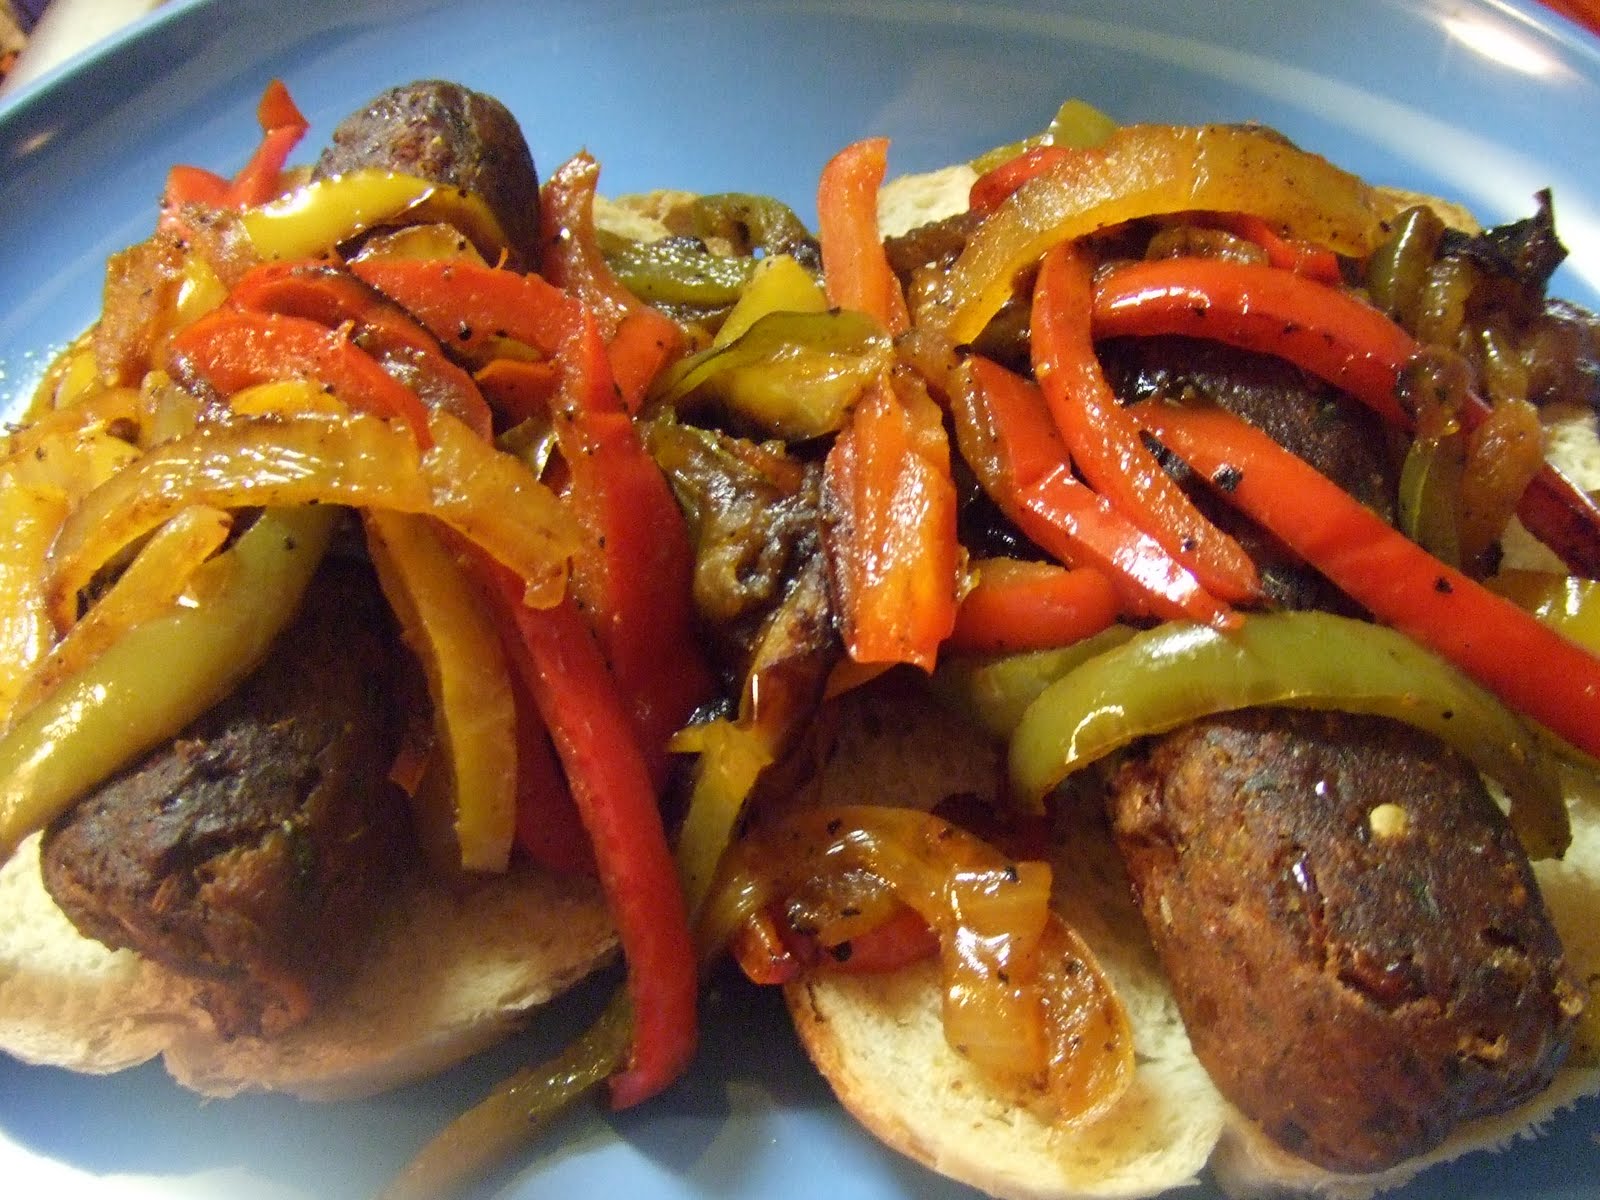 Spice Up Your Game with this Vegan Spicy Italian Sausage Recipe 